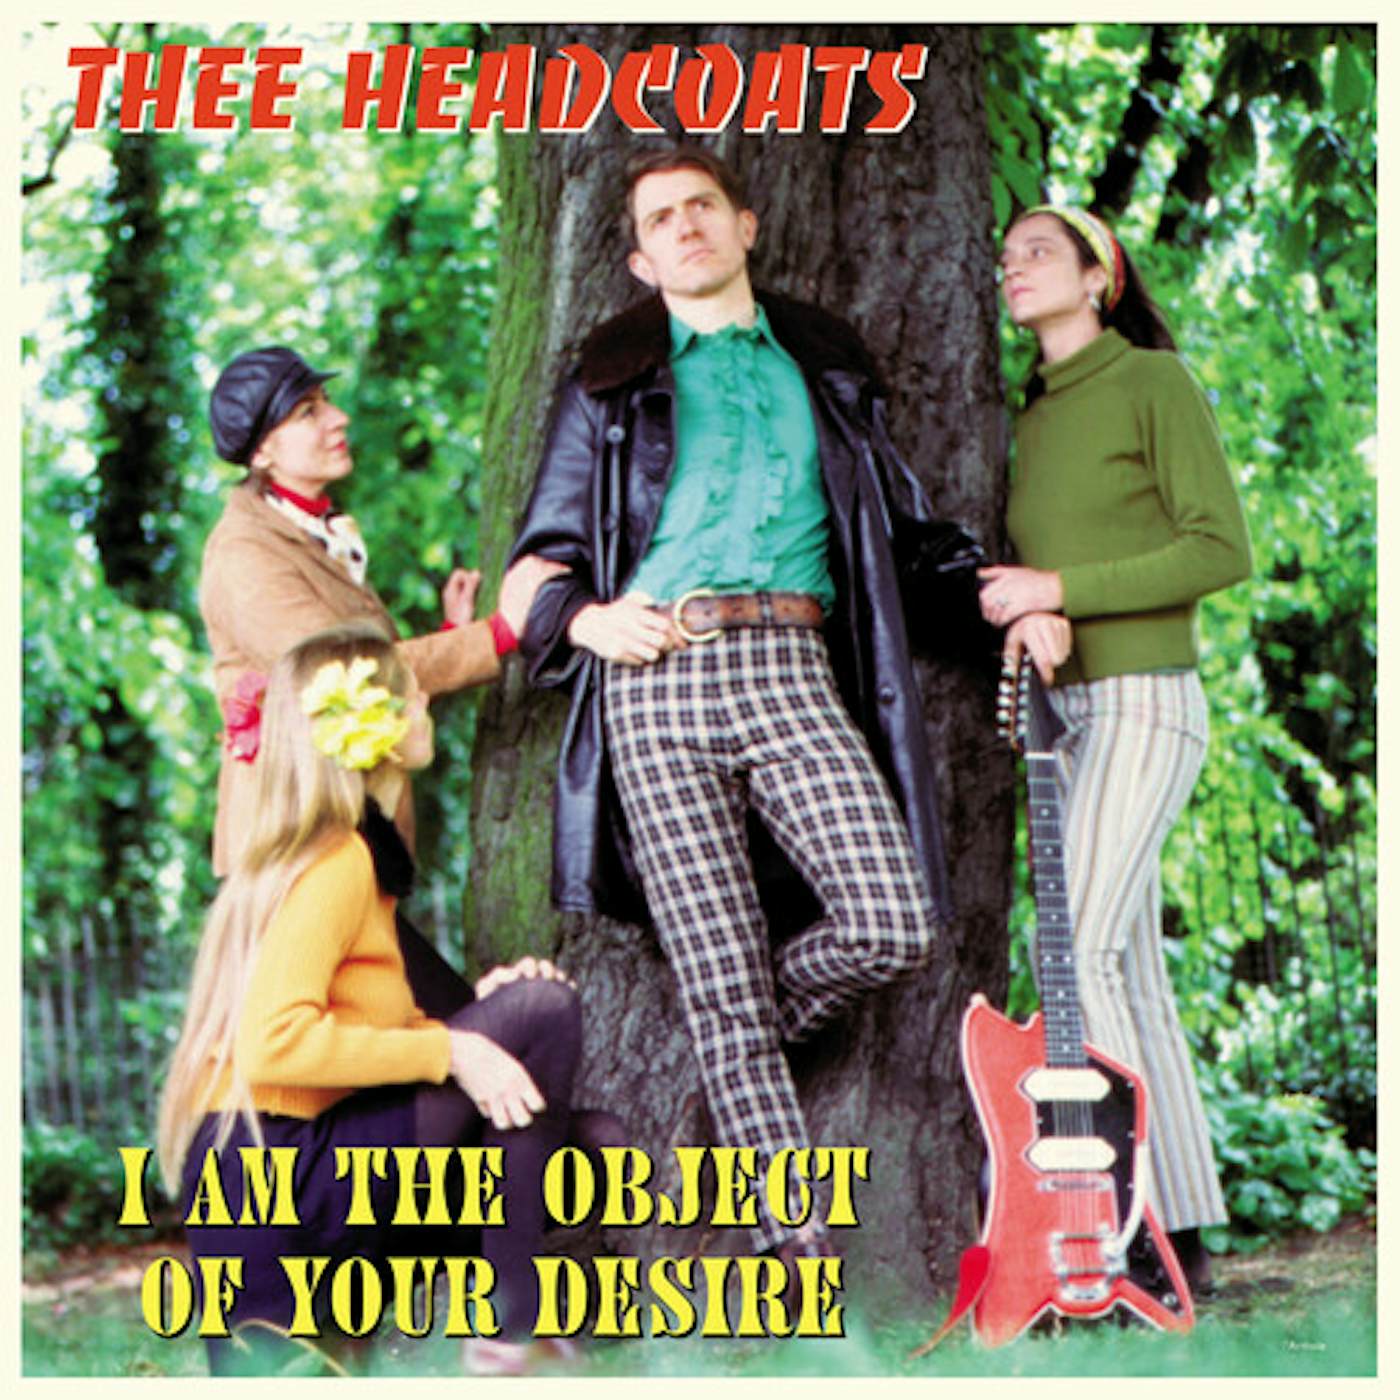 Thee Headcoats I Am The Object Of Your Desire Vinyl Record